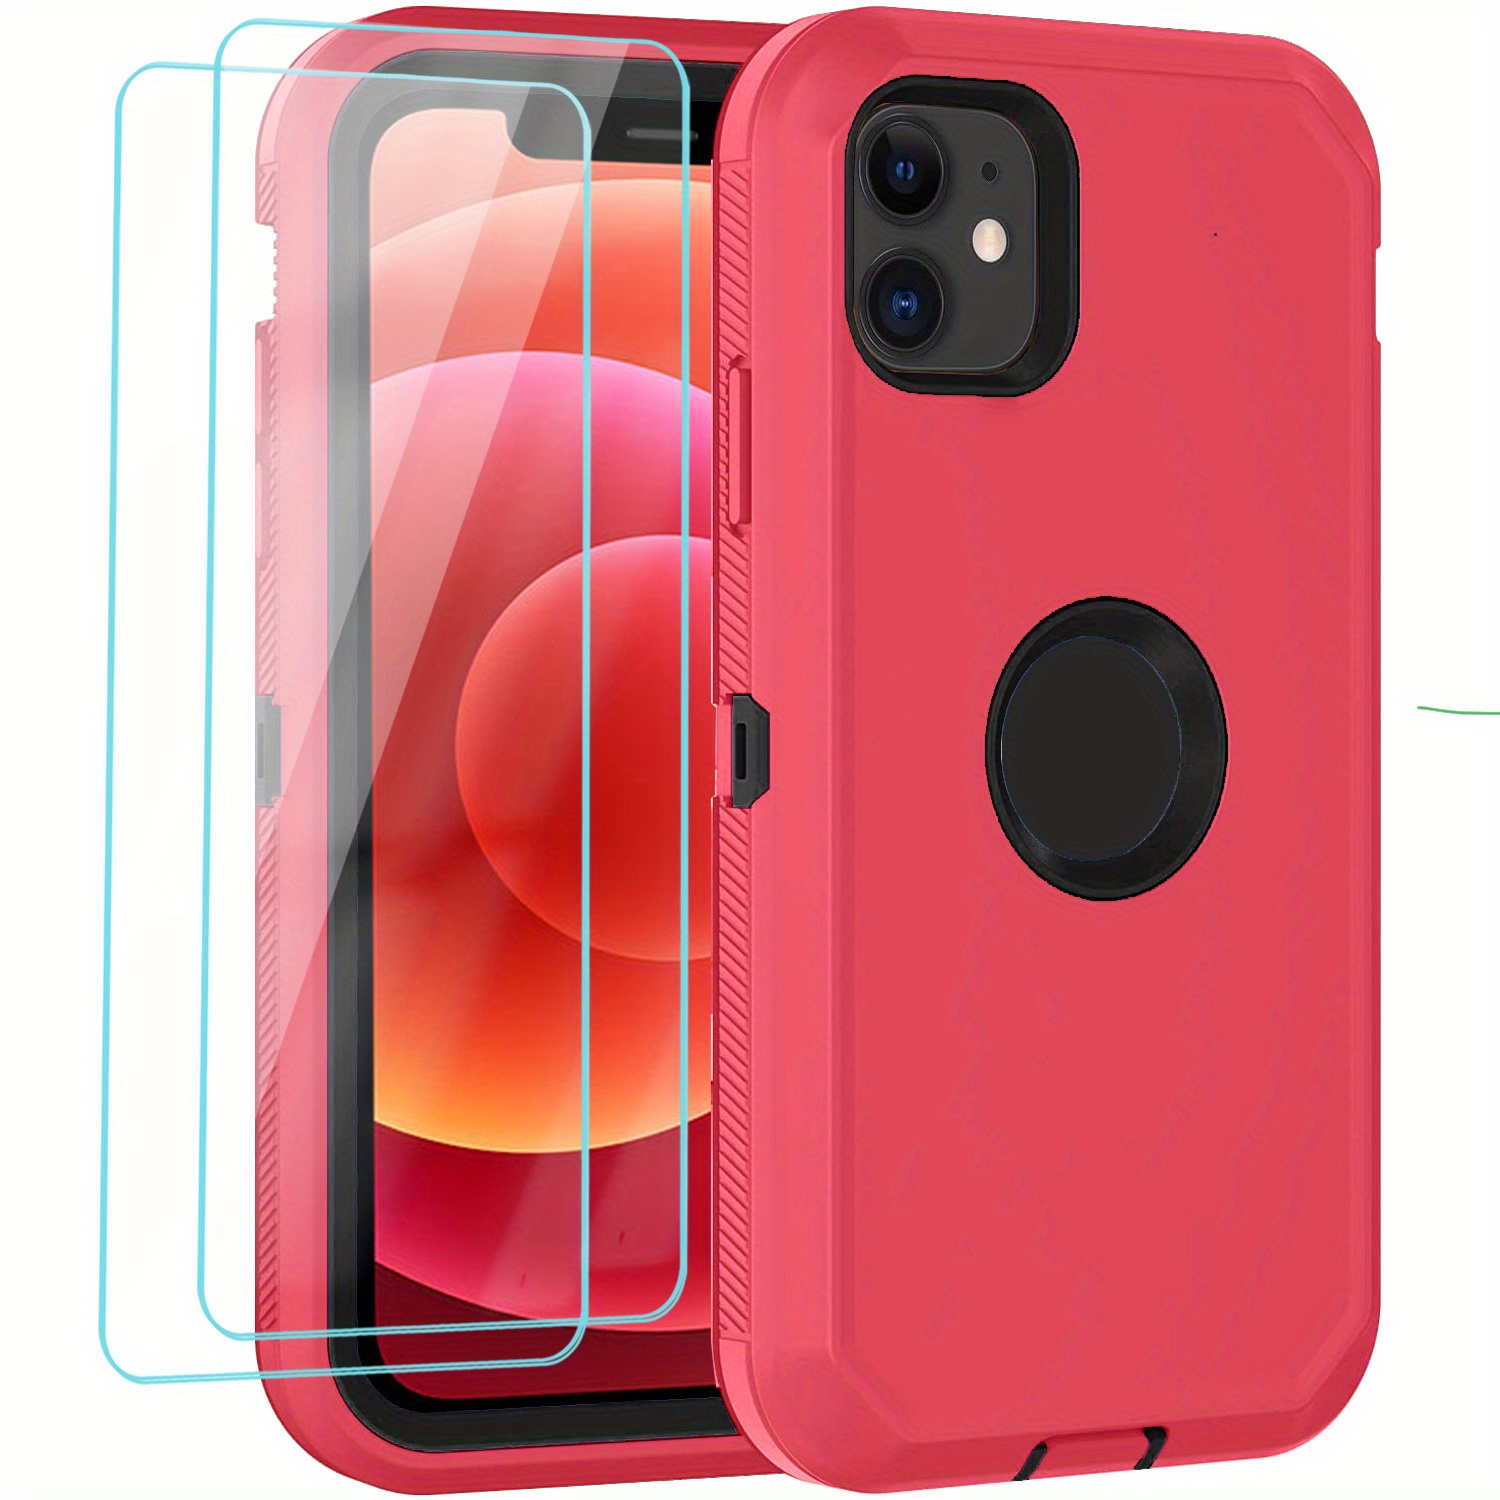 For iPhone 11 Pro Max Case, Spigen Tough Armor Shockproof Protection Cover